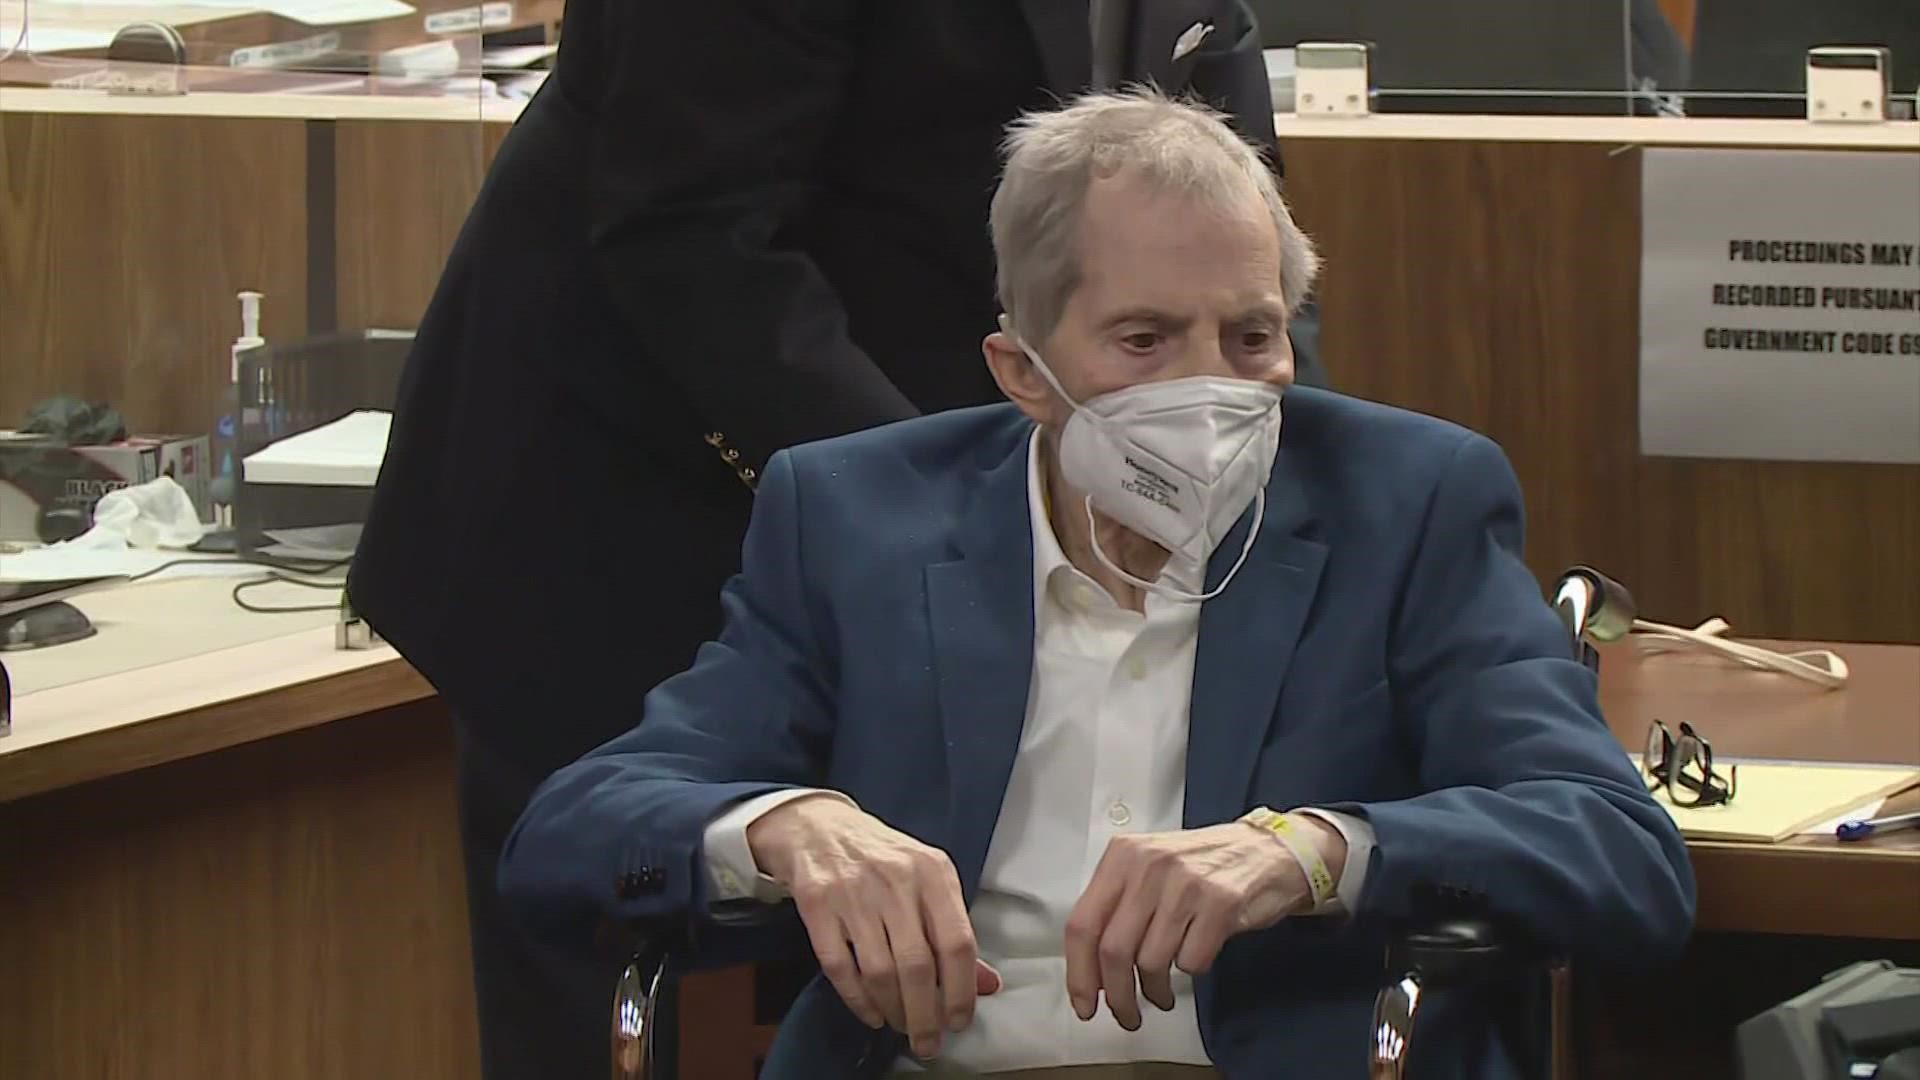 Durst was admitted to a prison medical unit with COVID-19 in October, not long after he was sentenced to life in prison for the 2000 murder of friend Susan Berman.